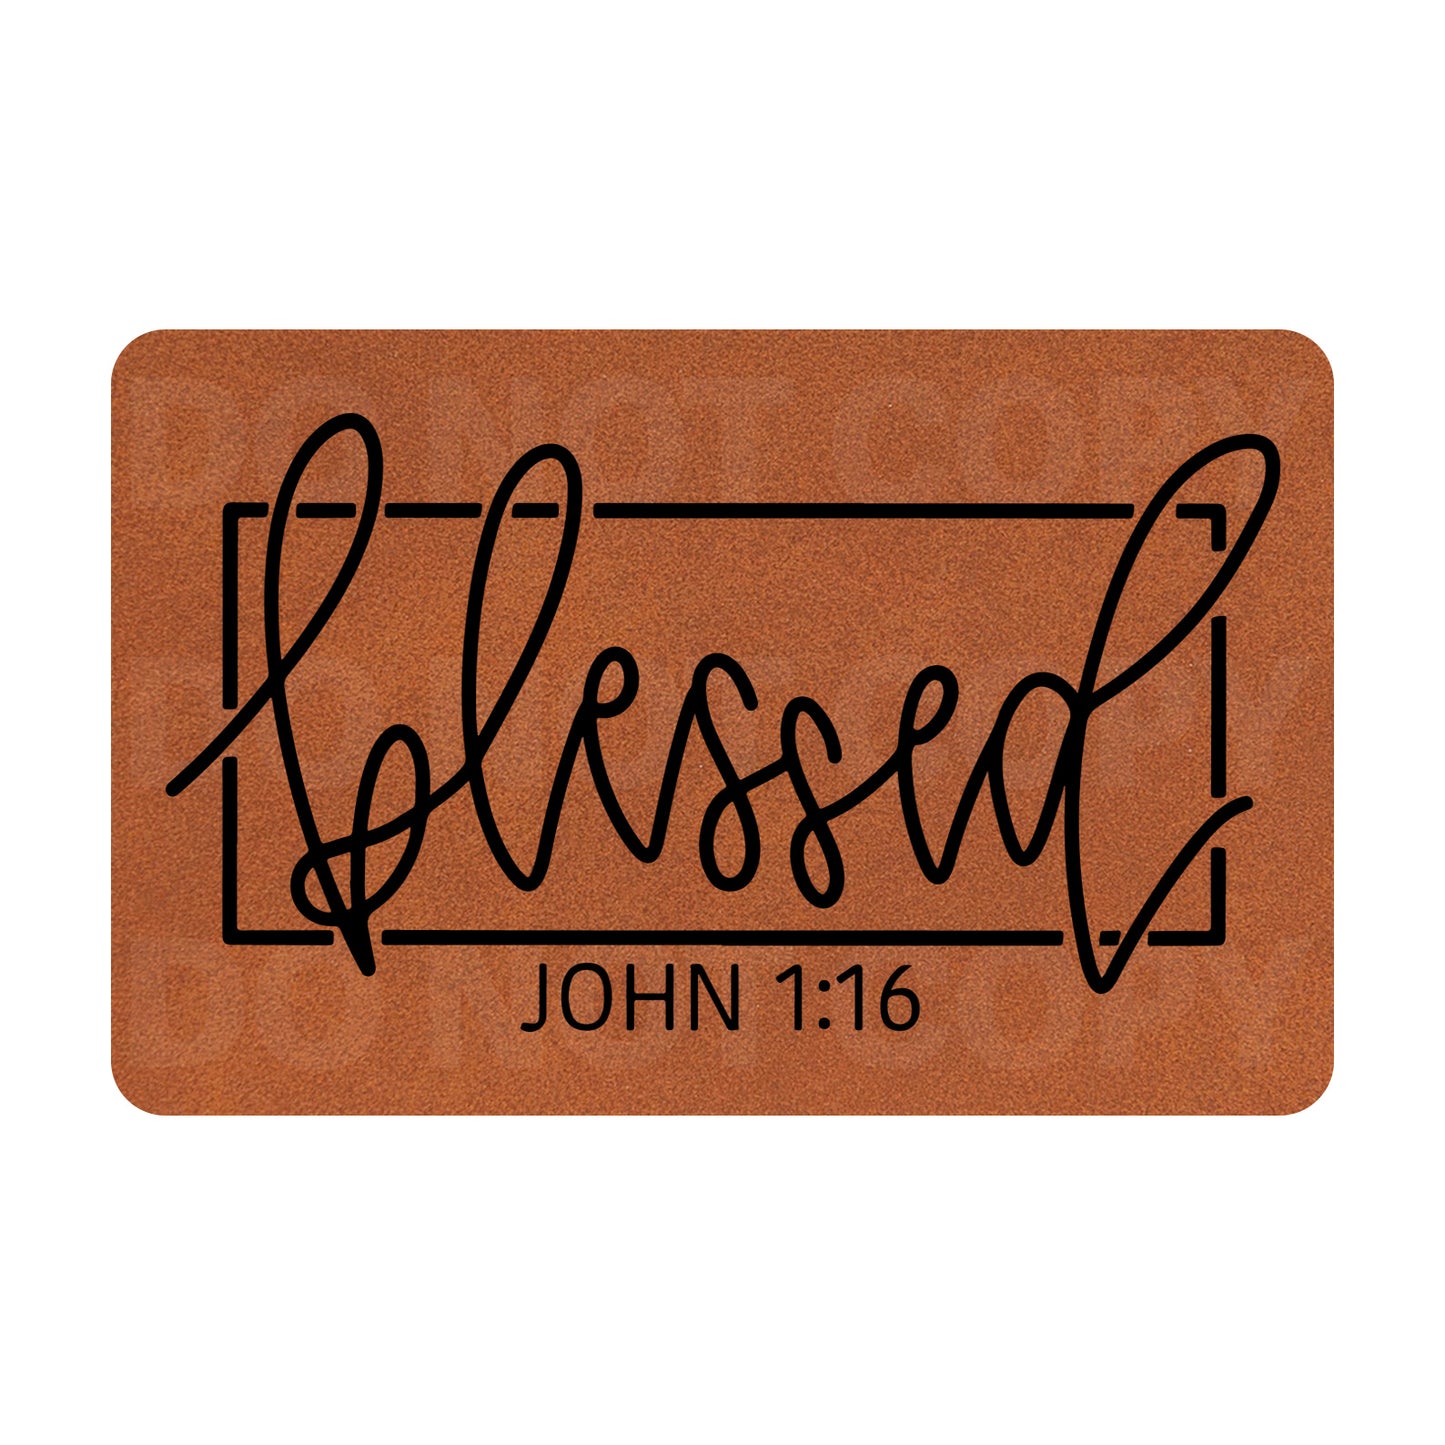 Blessed John 1:16 Leatherette Patch